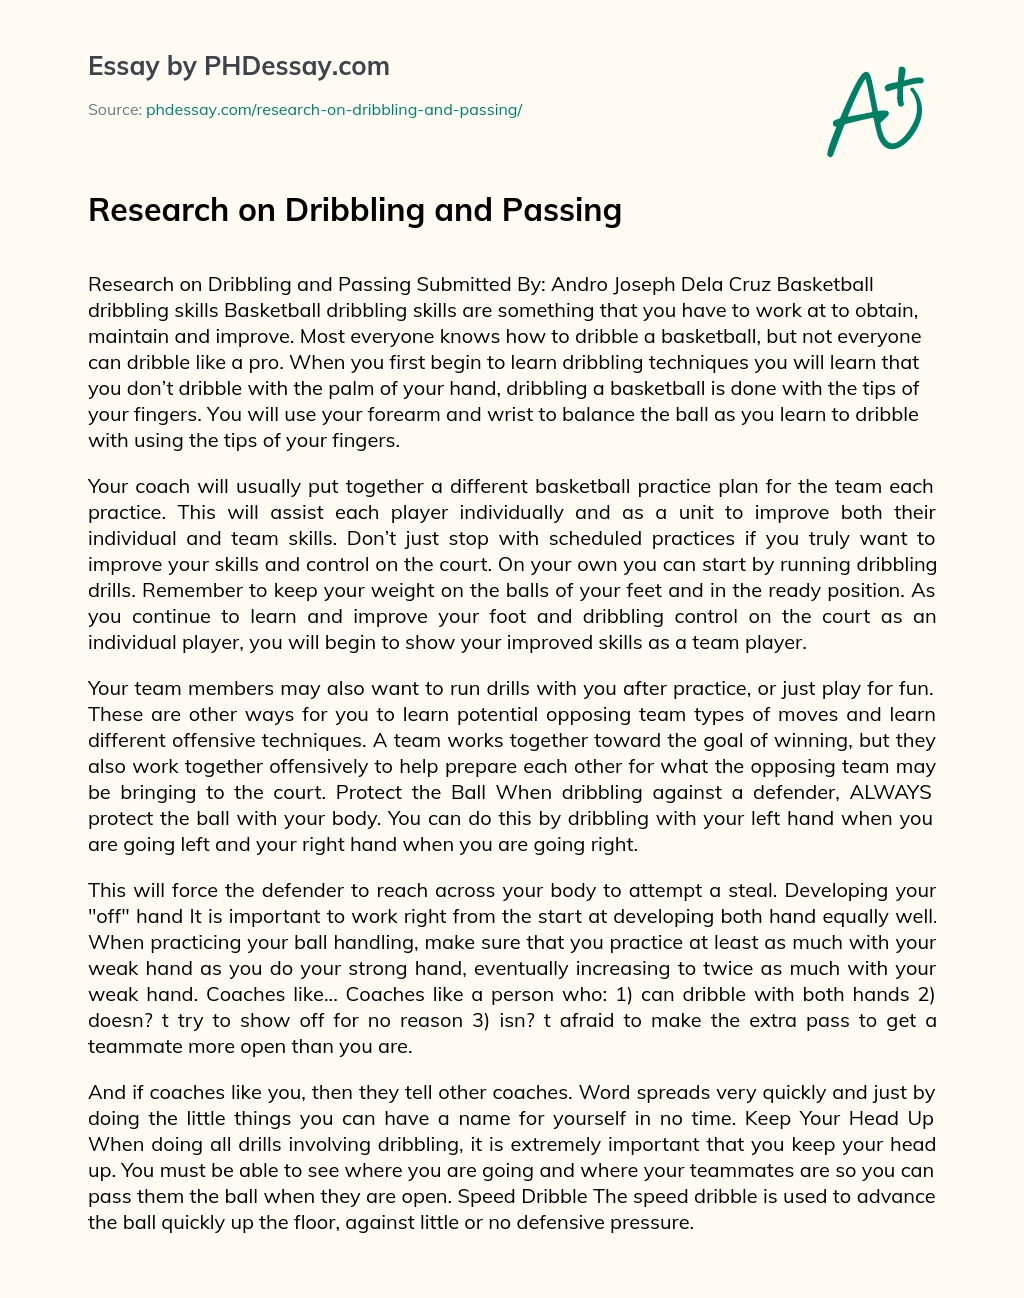 Research on Dribbling and Passing essay